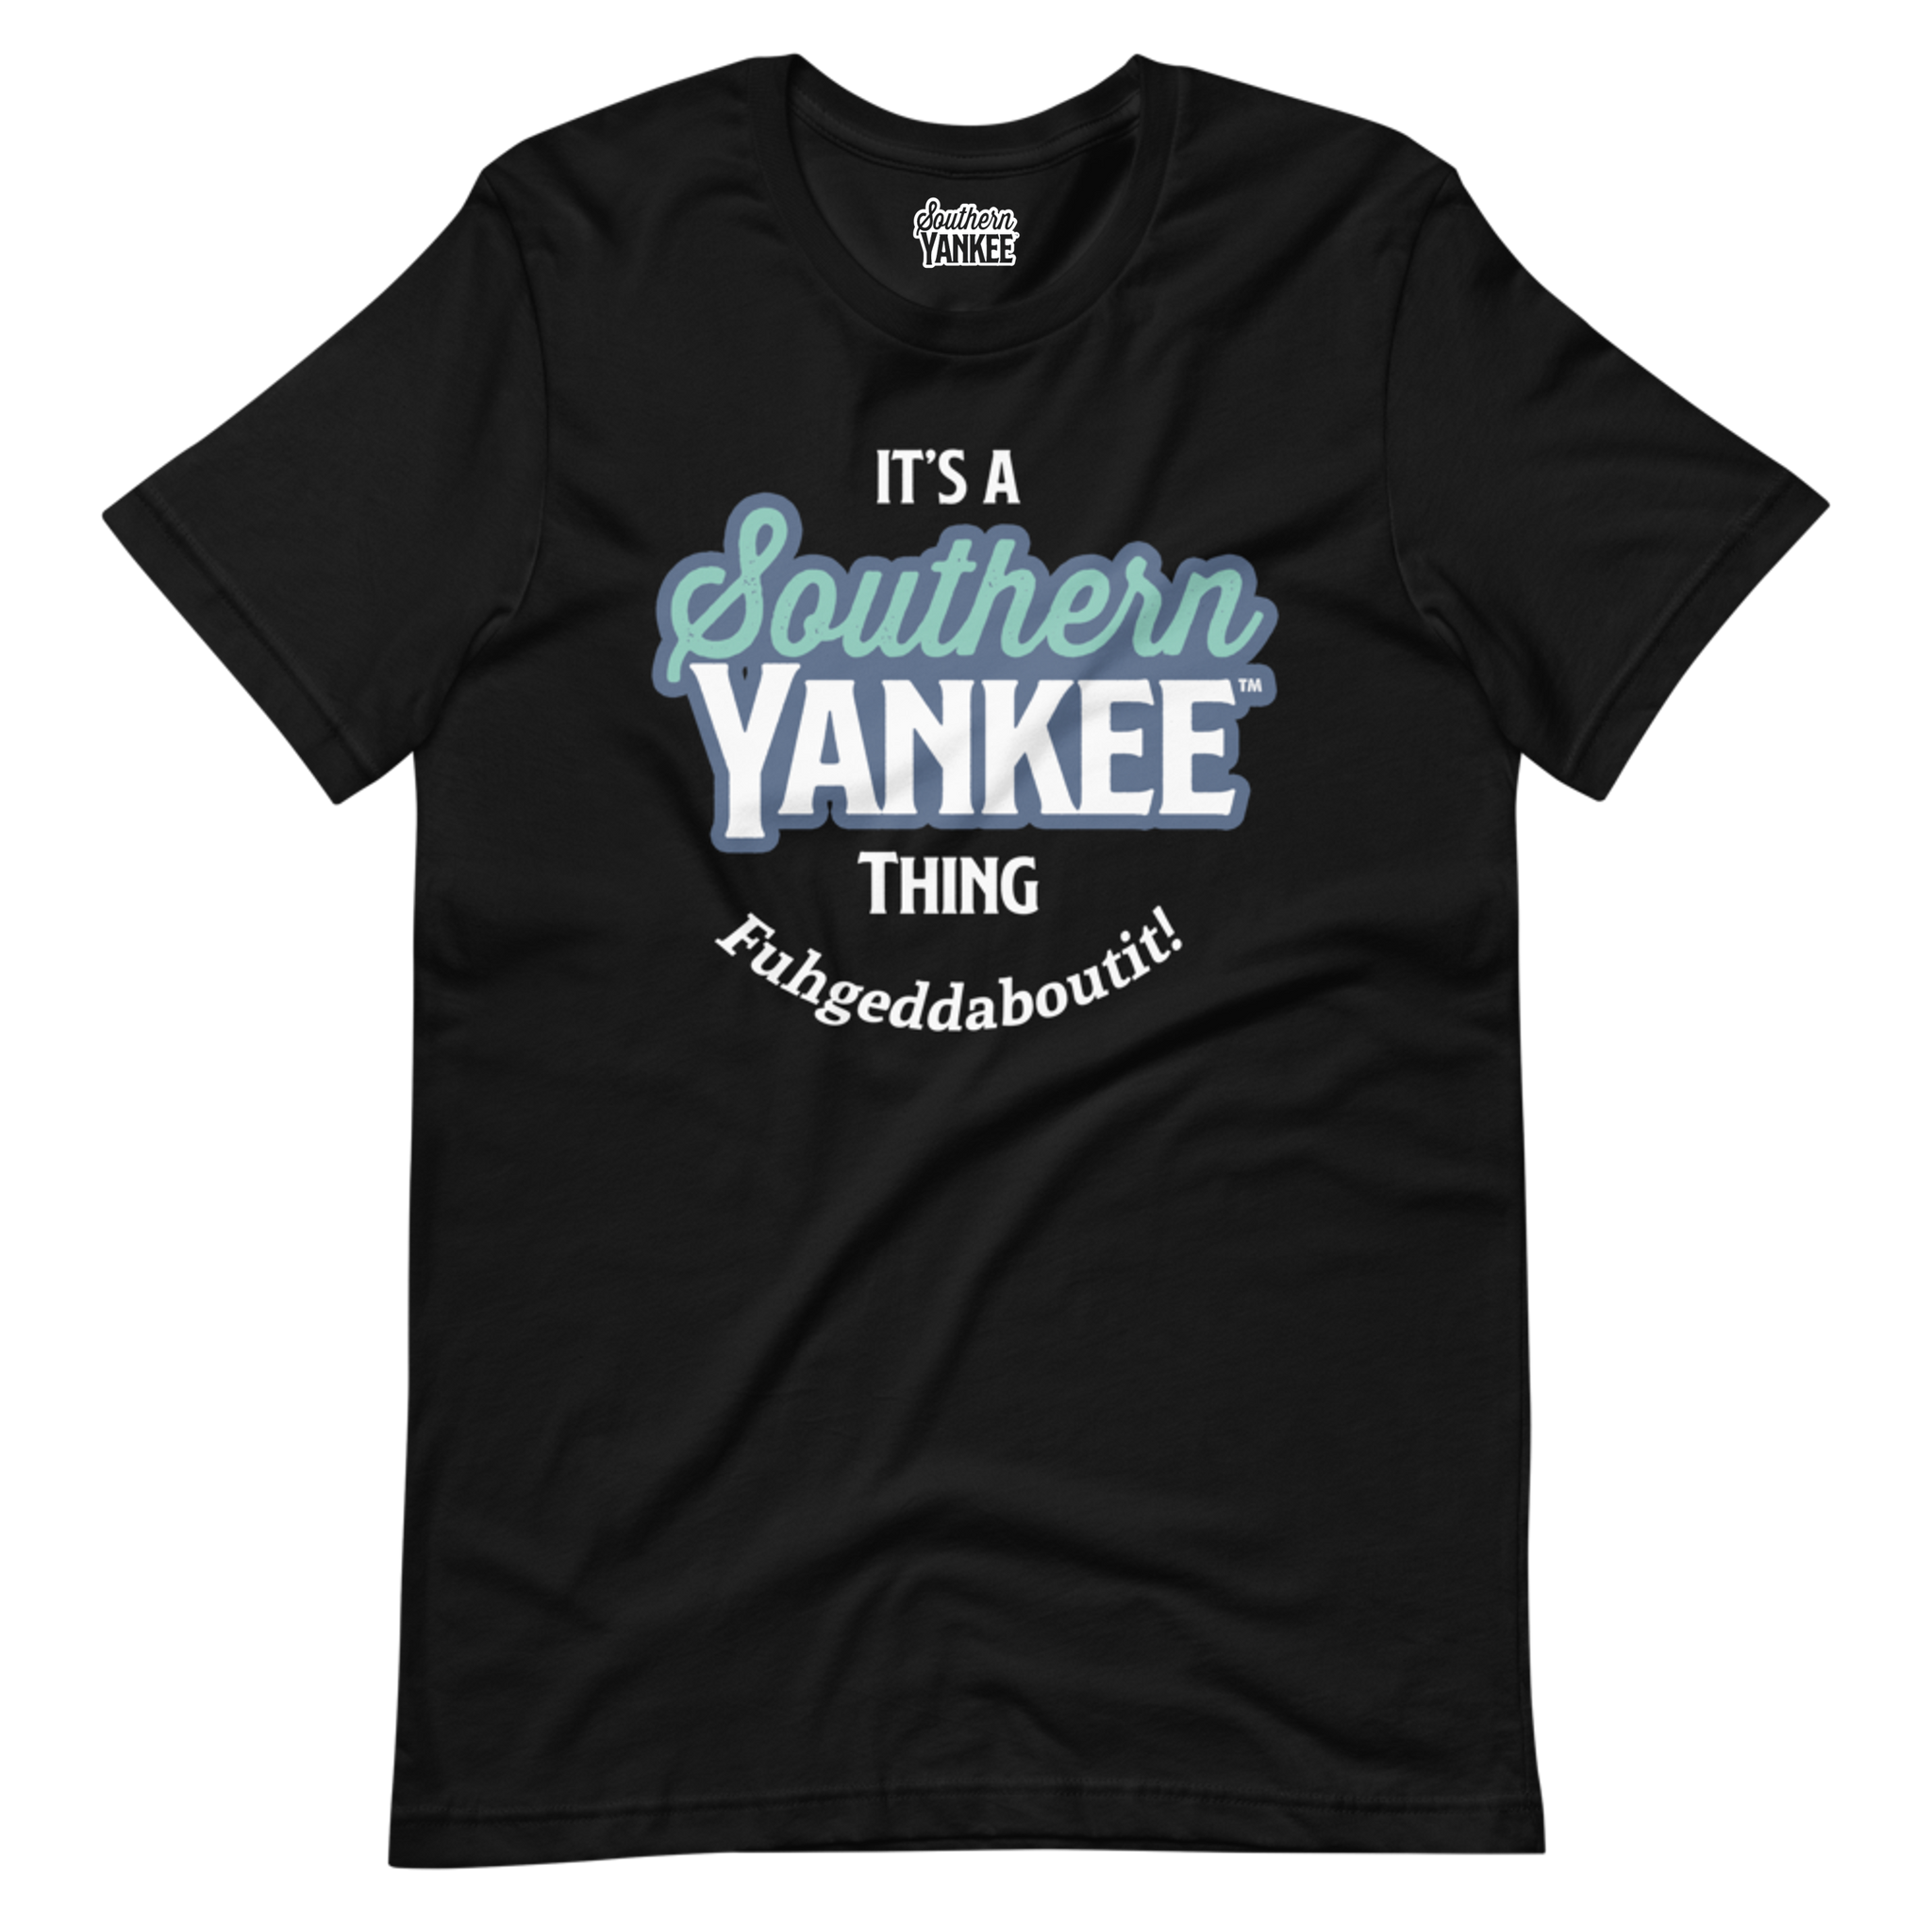 Southern Yankee Thing Fuhgeddaboutit! Tee-Northern Roots Southern Soul